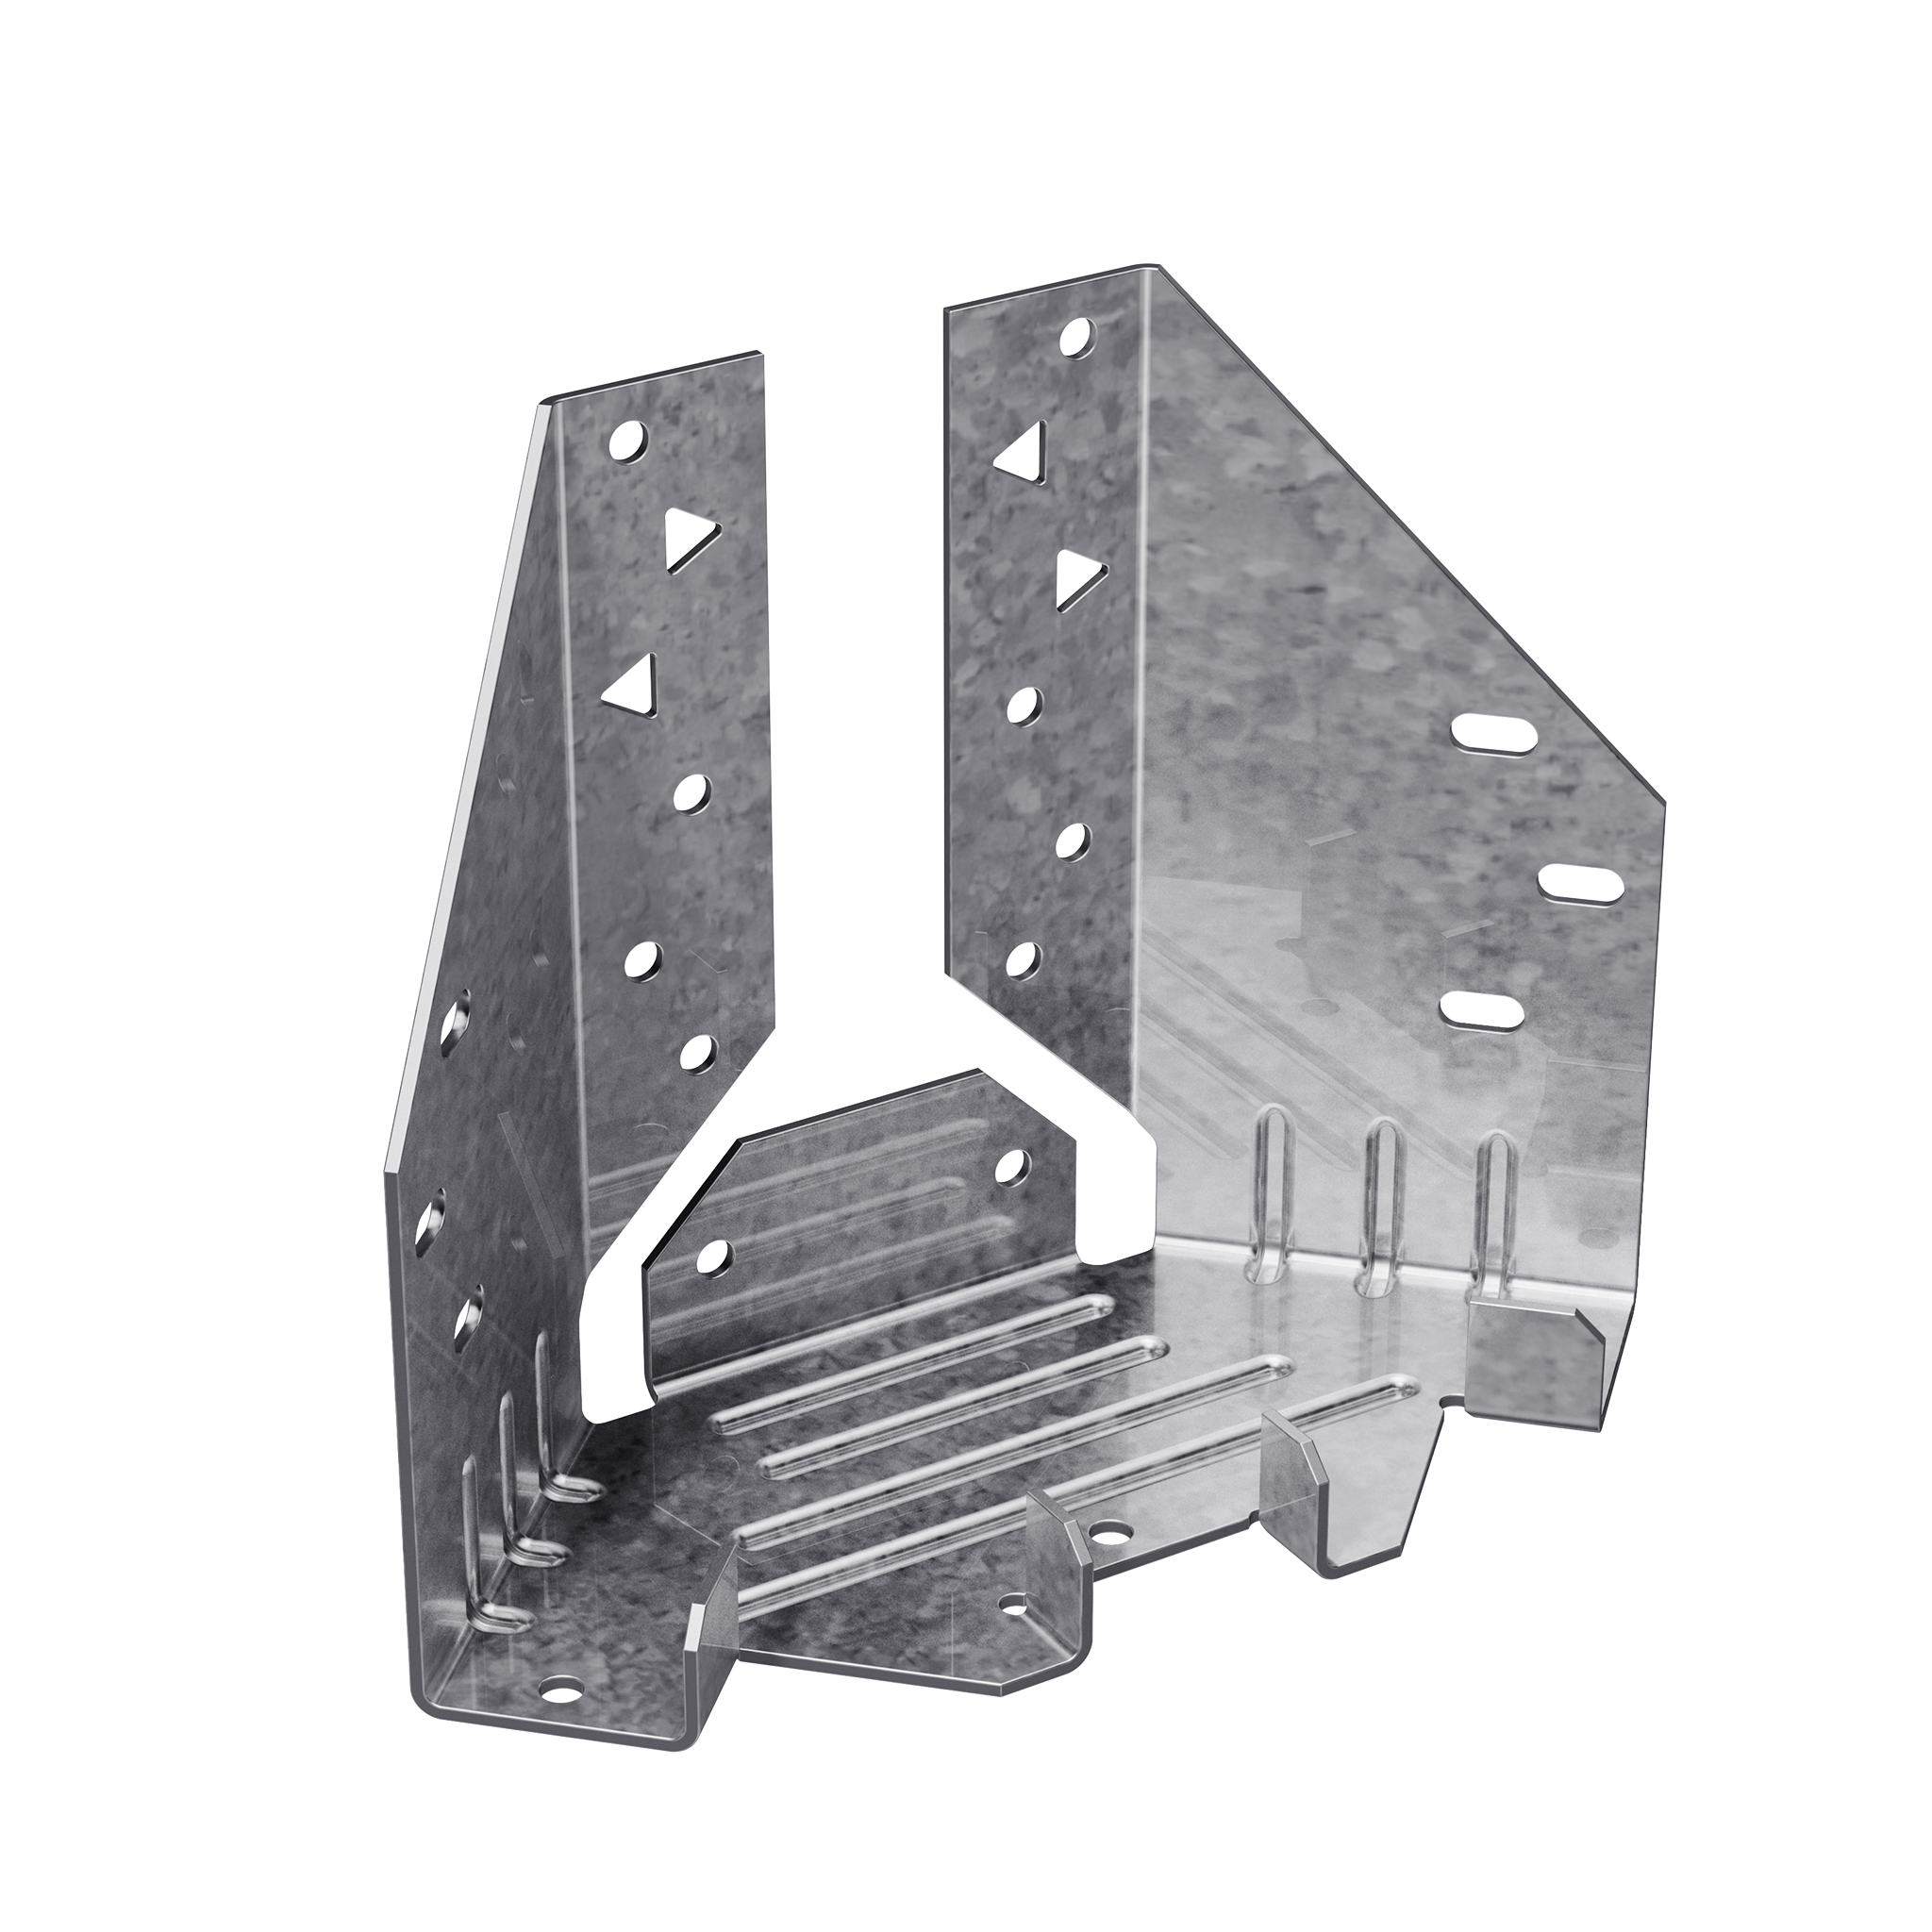 MTHMQ 4-1/8 in. Galvanized Multiple Truss Hanger with Strong-Drive® SDS Screws (Pack of 10)